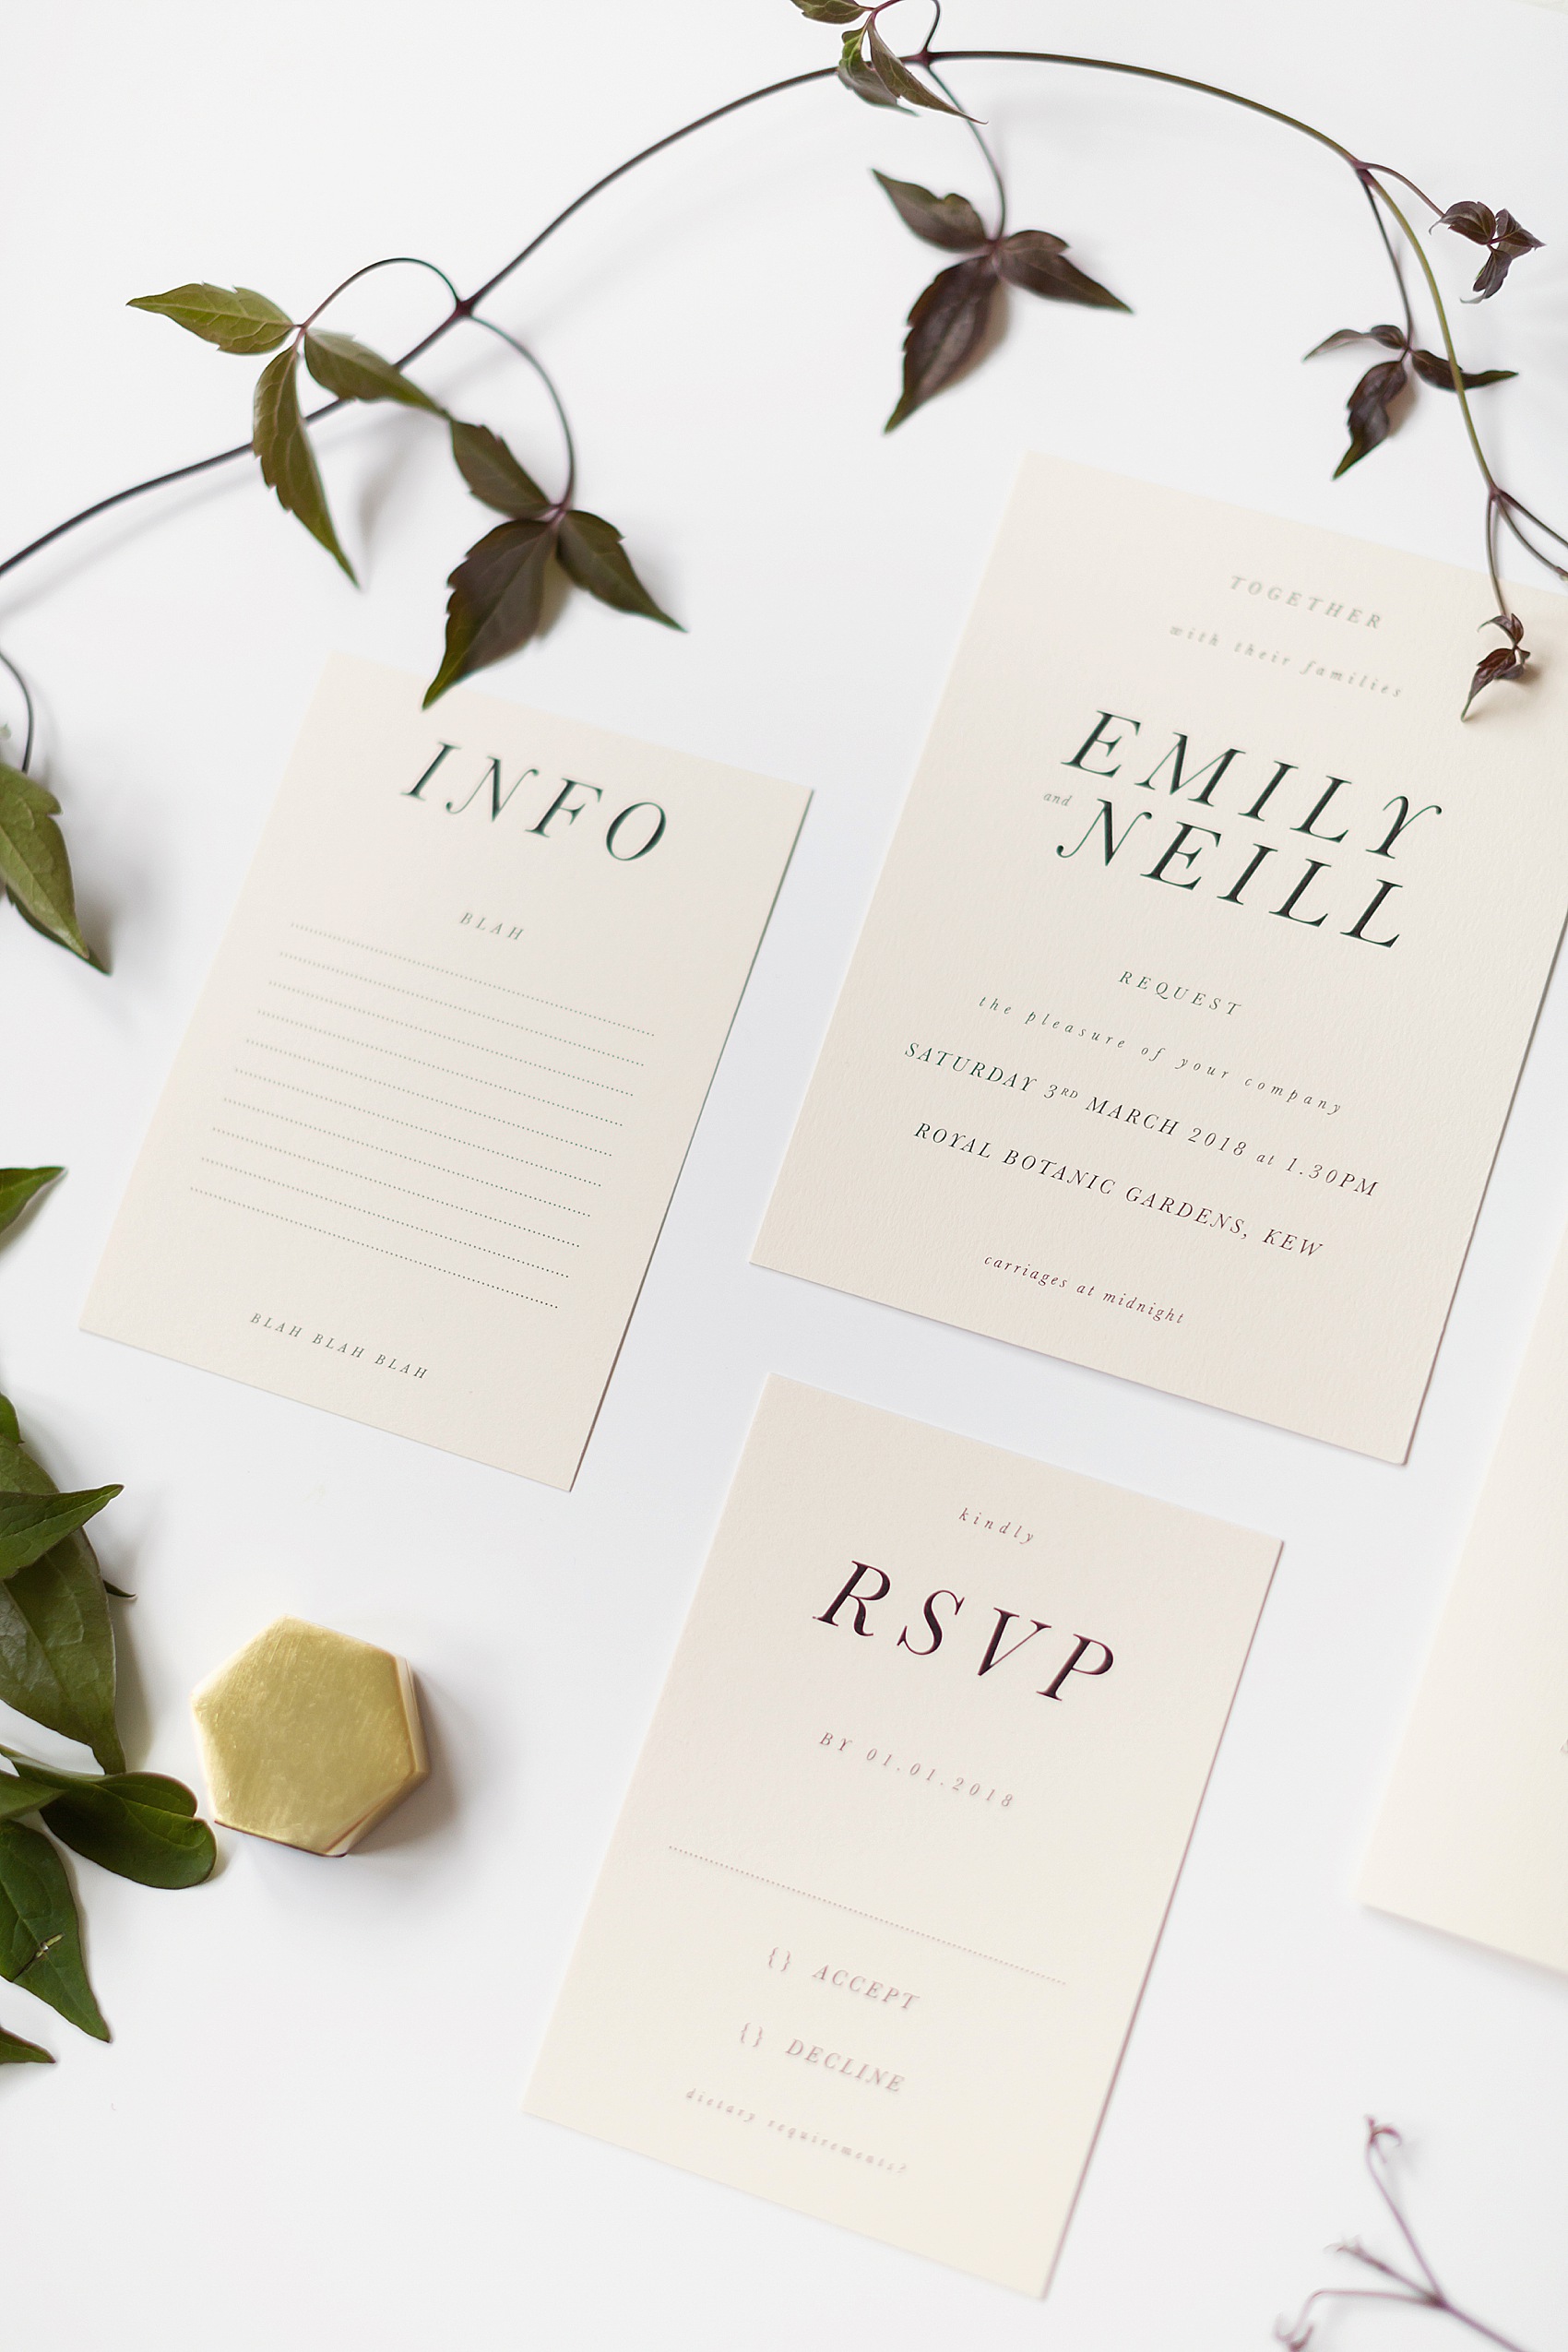 Wedding stationery for the budget conscious  - Wedding Stationery Ideas For The Budget-Conscious Couple